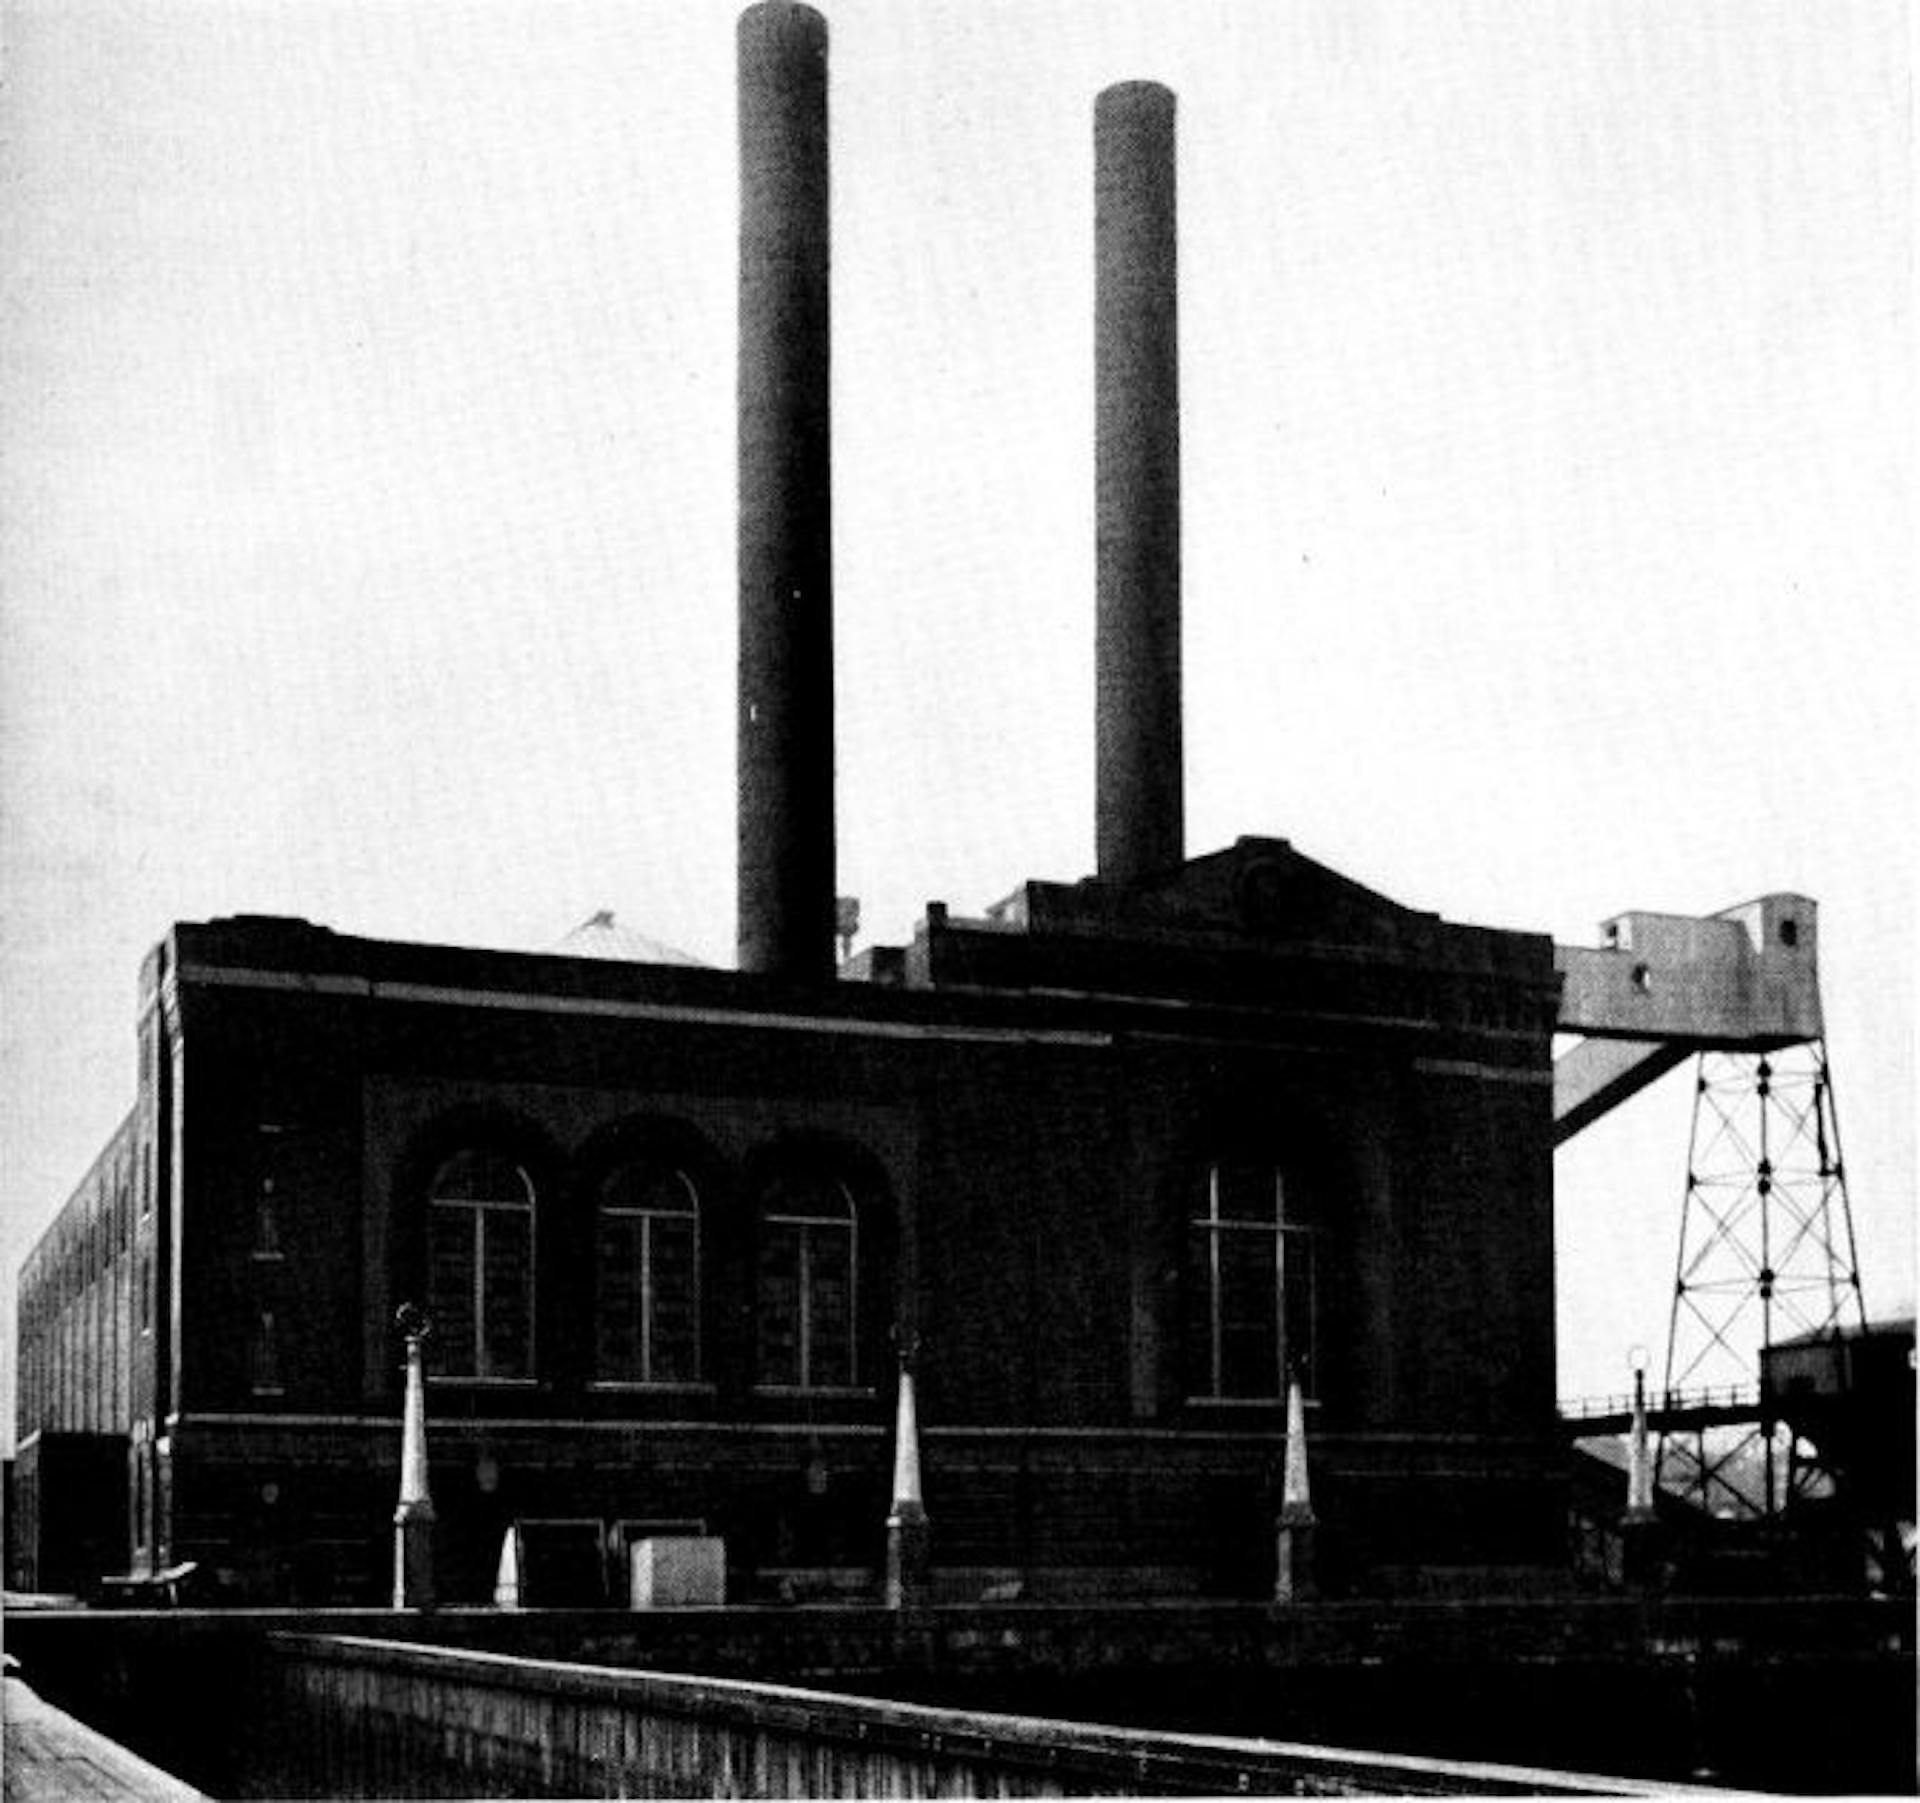 South Boston Station of the Boston Elevated Ry. Co., Boston, Mass. 9600 Horse Power of Babcock & Wilcox Boilers and Superheaters Installed in this Station